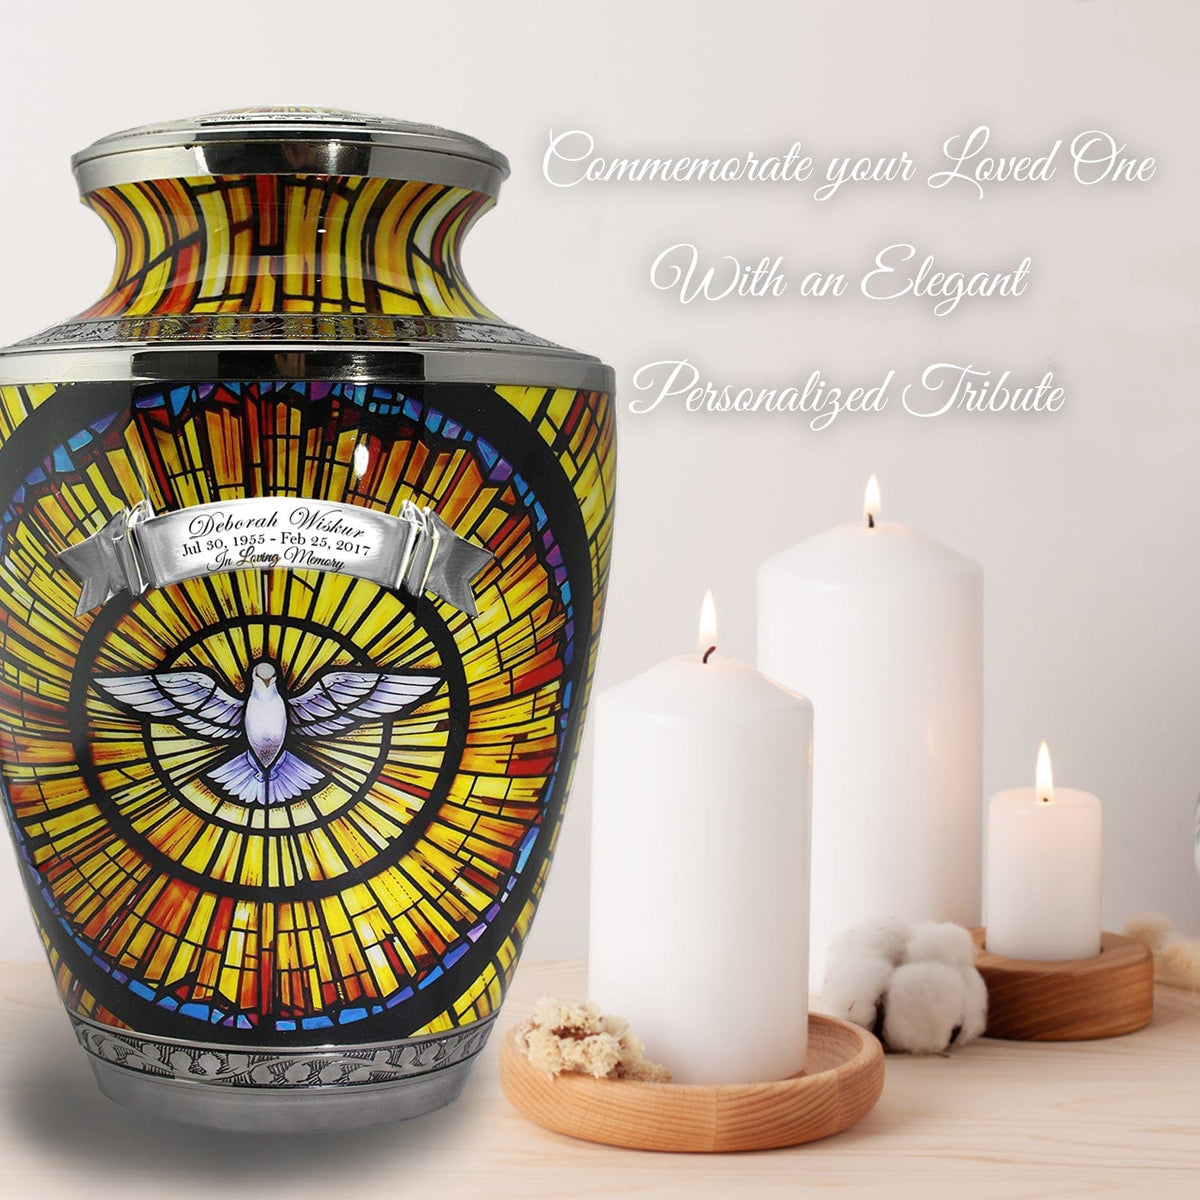 Commemorative Cremation Urns Home &amp; Garden Large Holy Dove Cremation Urns